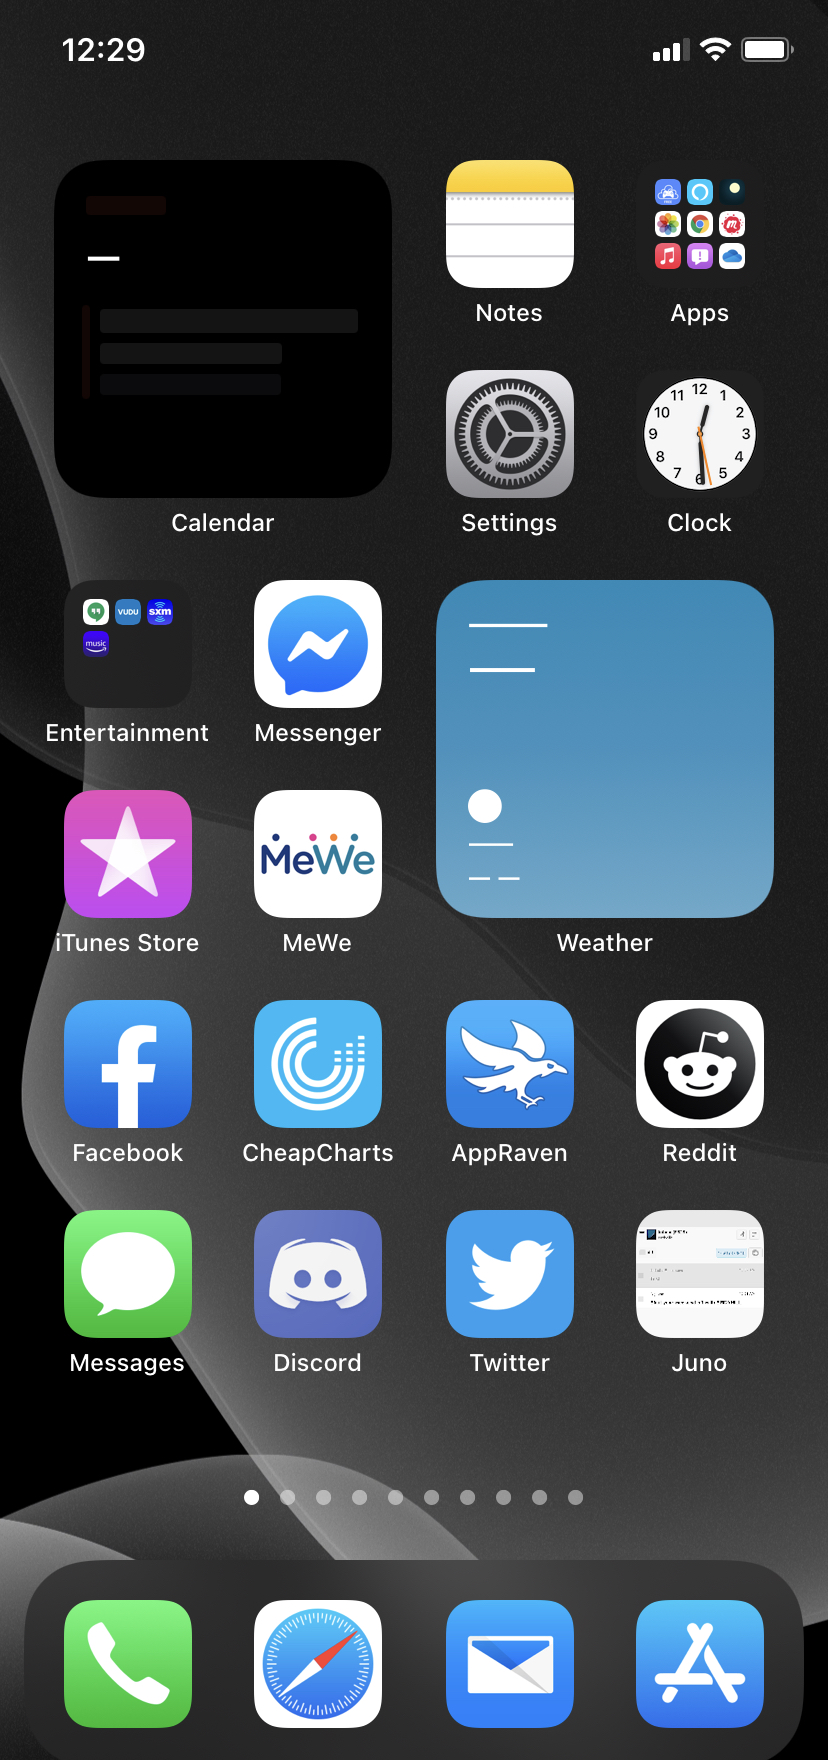 Post your iOS 14 home screen layout | Page 21 | MacRumors Forums